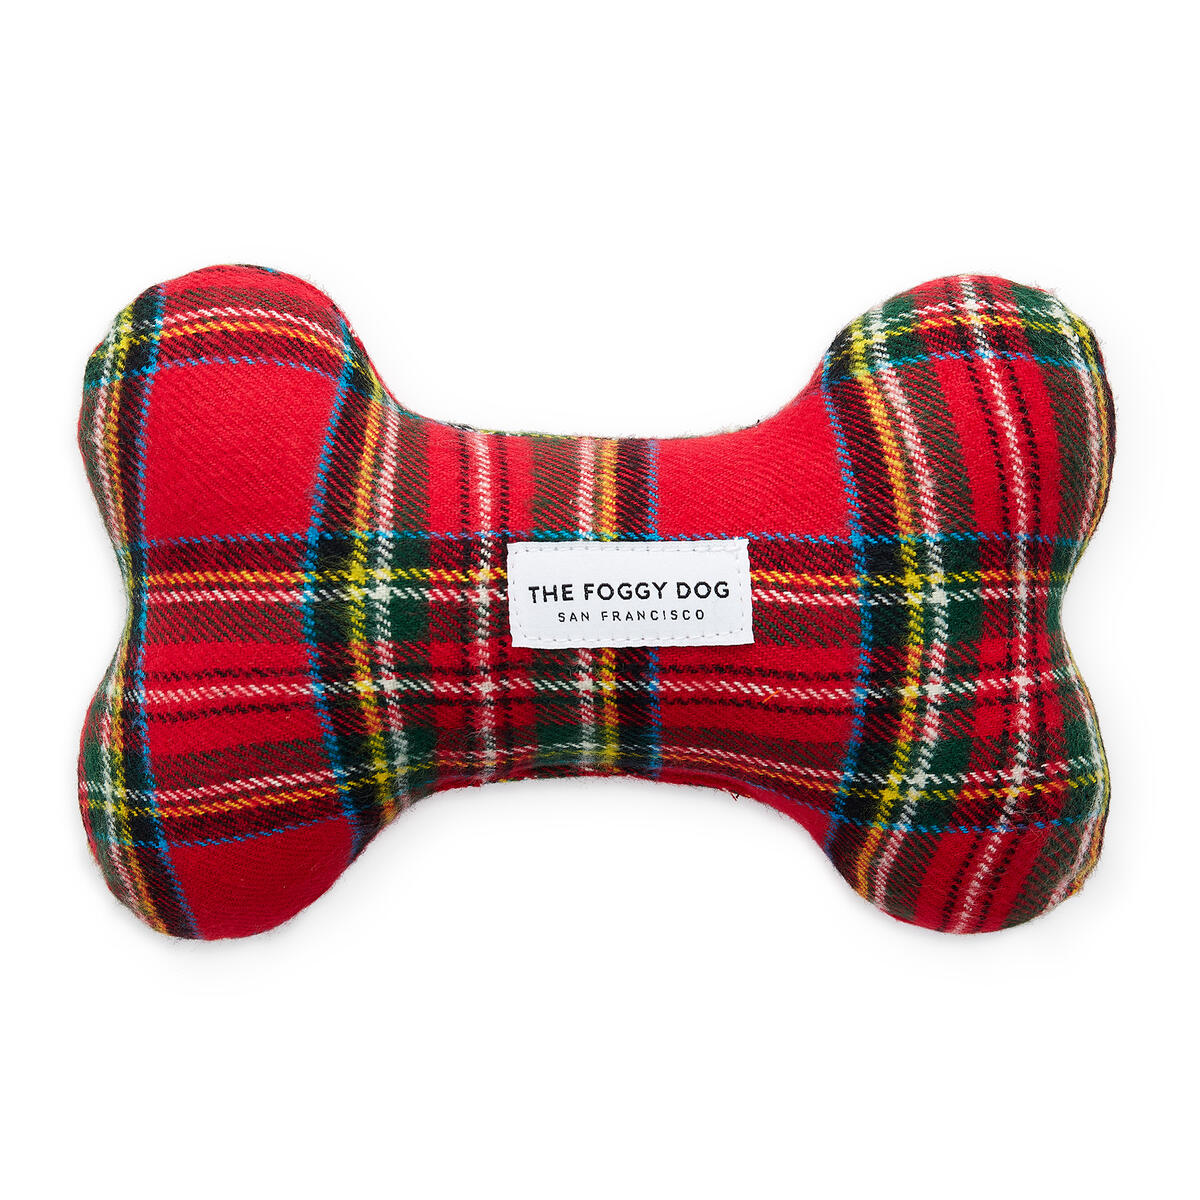 The Foggy Dog Squeaky Toy